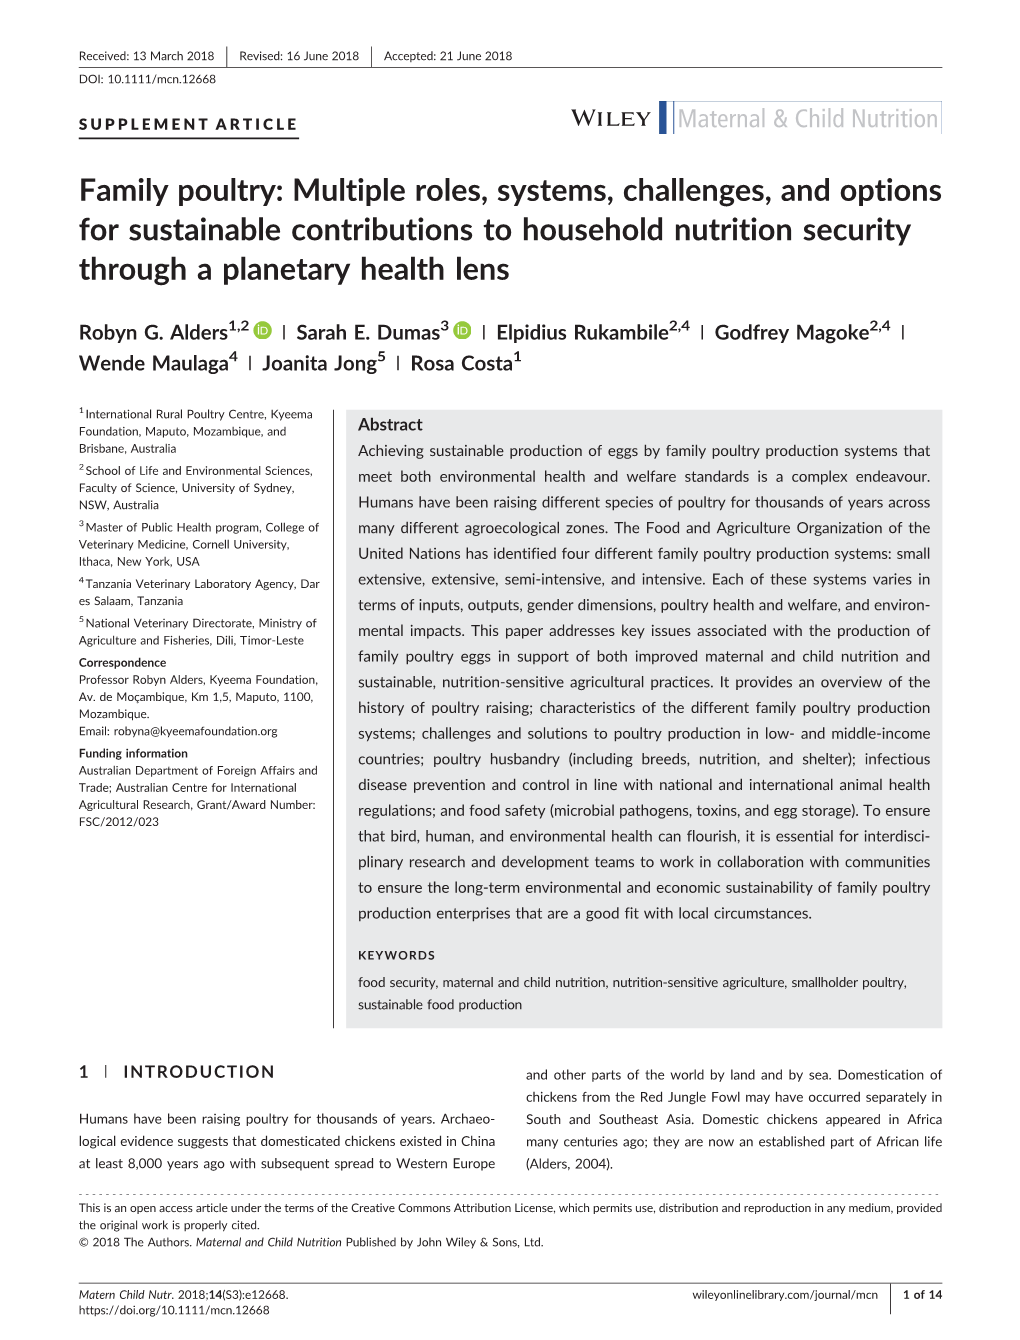 Family Poultry: Multiple Roles, Systems, Challenges, and Options for Sustainable Contributions to Household Nutrition Security Through a Planetary Health Lens